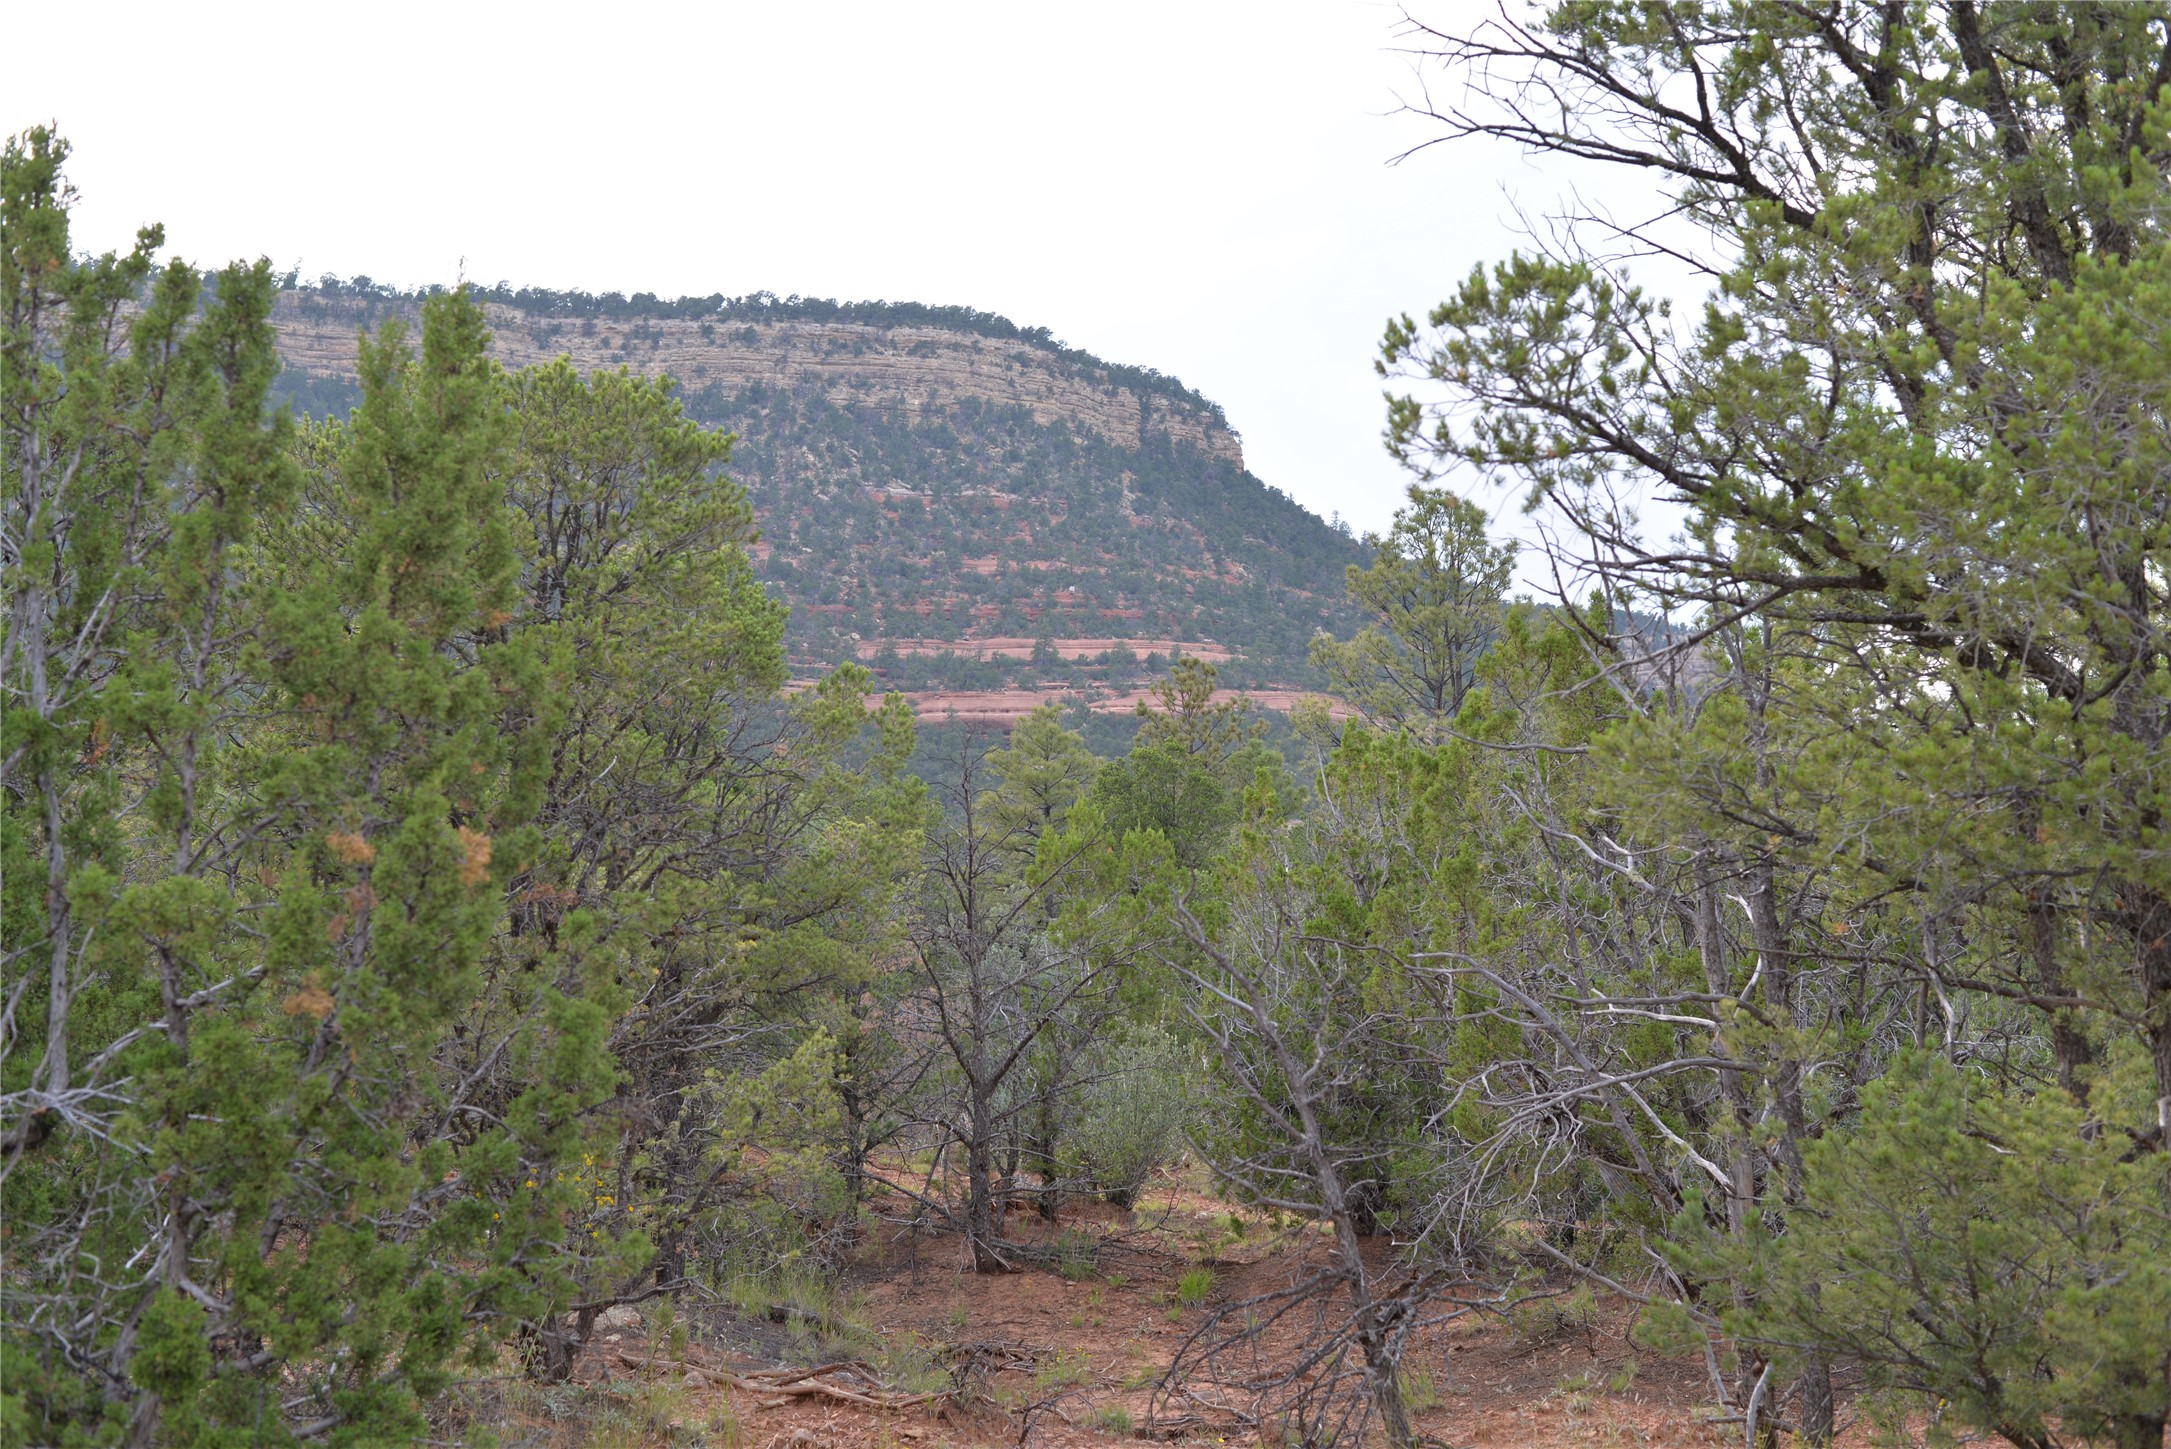 View of the Glorieta Mesa cliffs from the property.